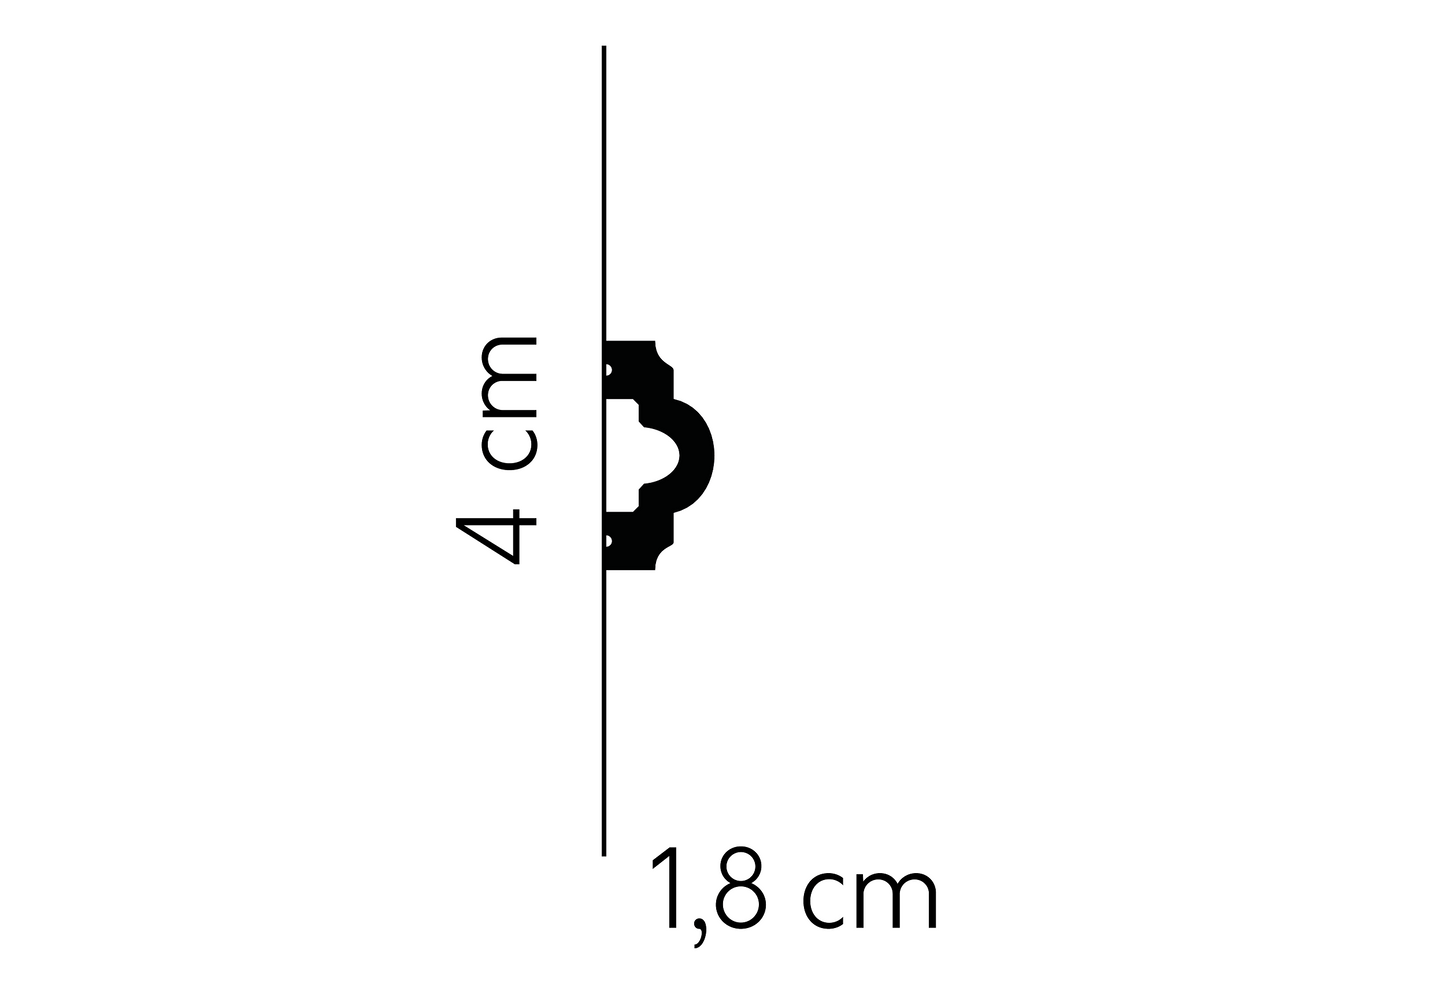 MD002 - Dado Rail dimensions of 4cm height and 1.8cm width